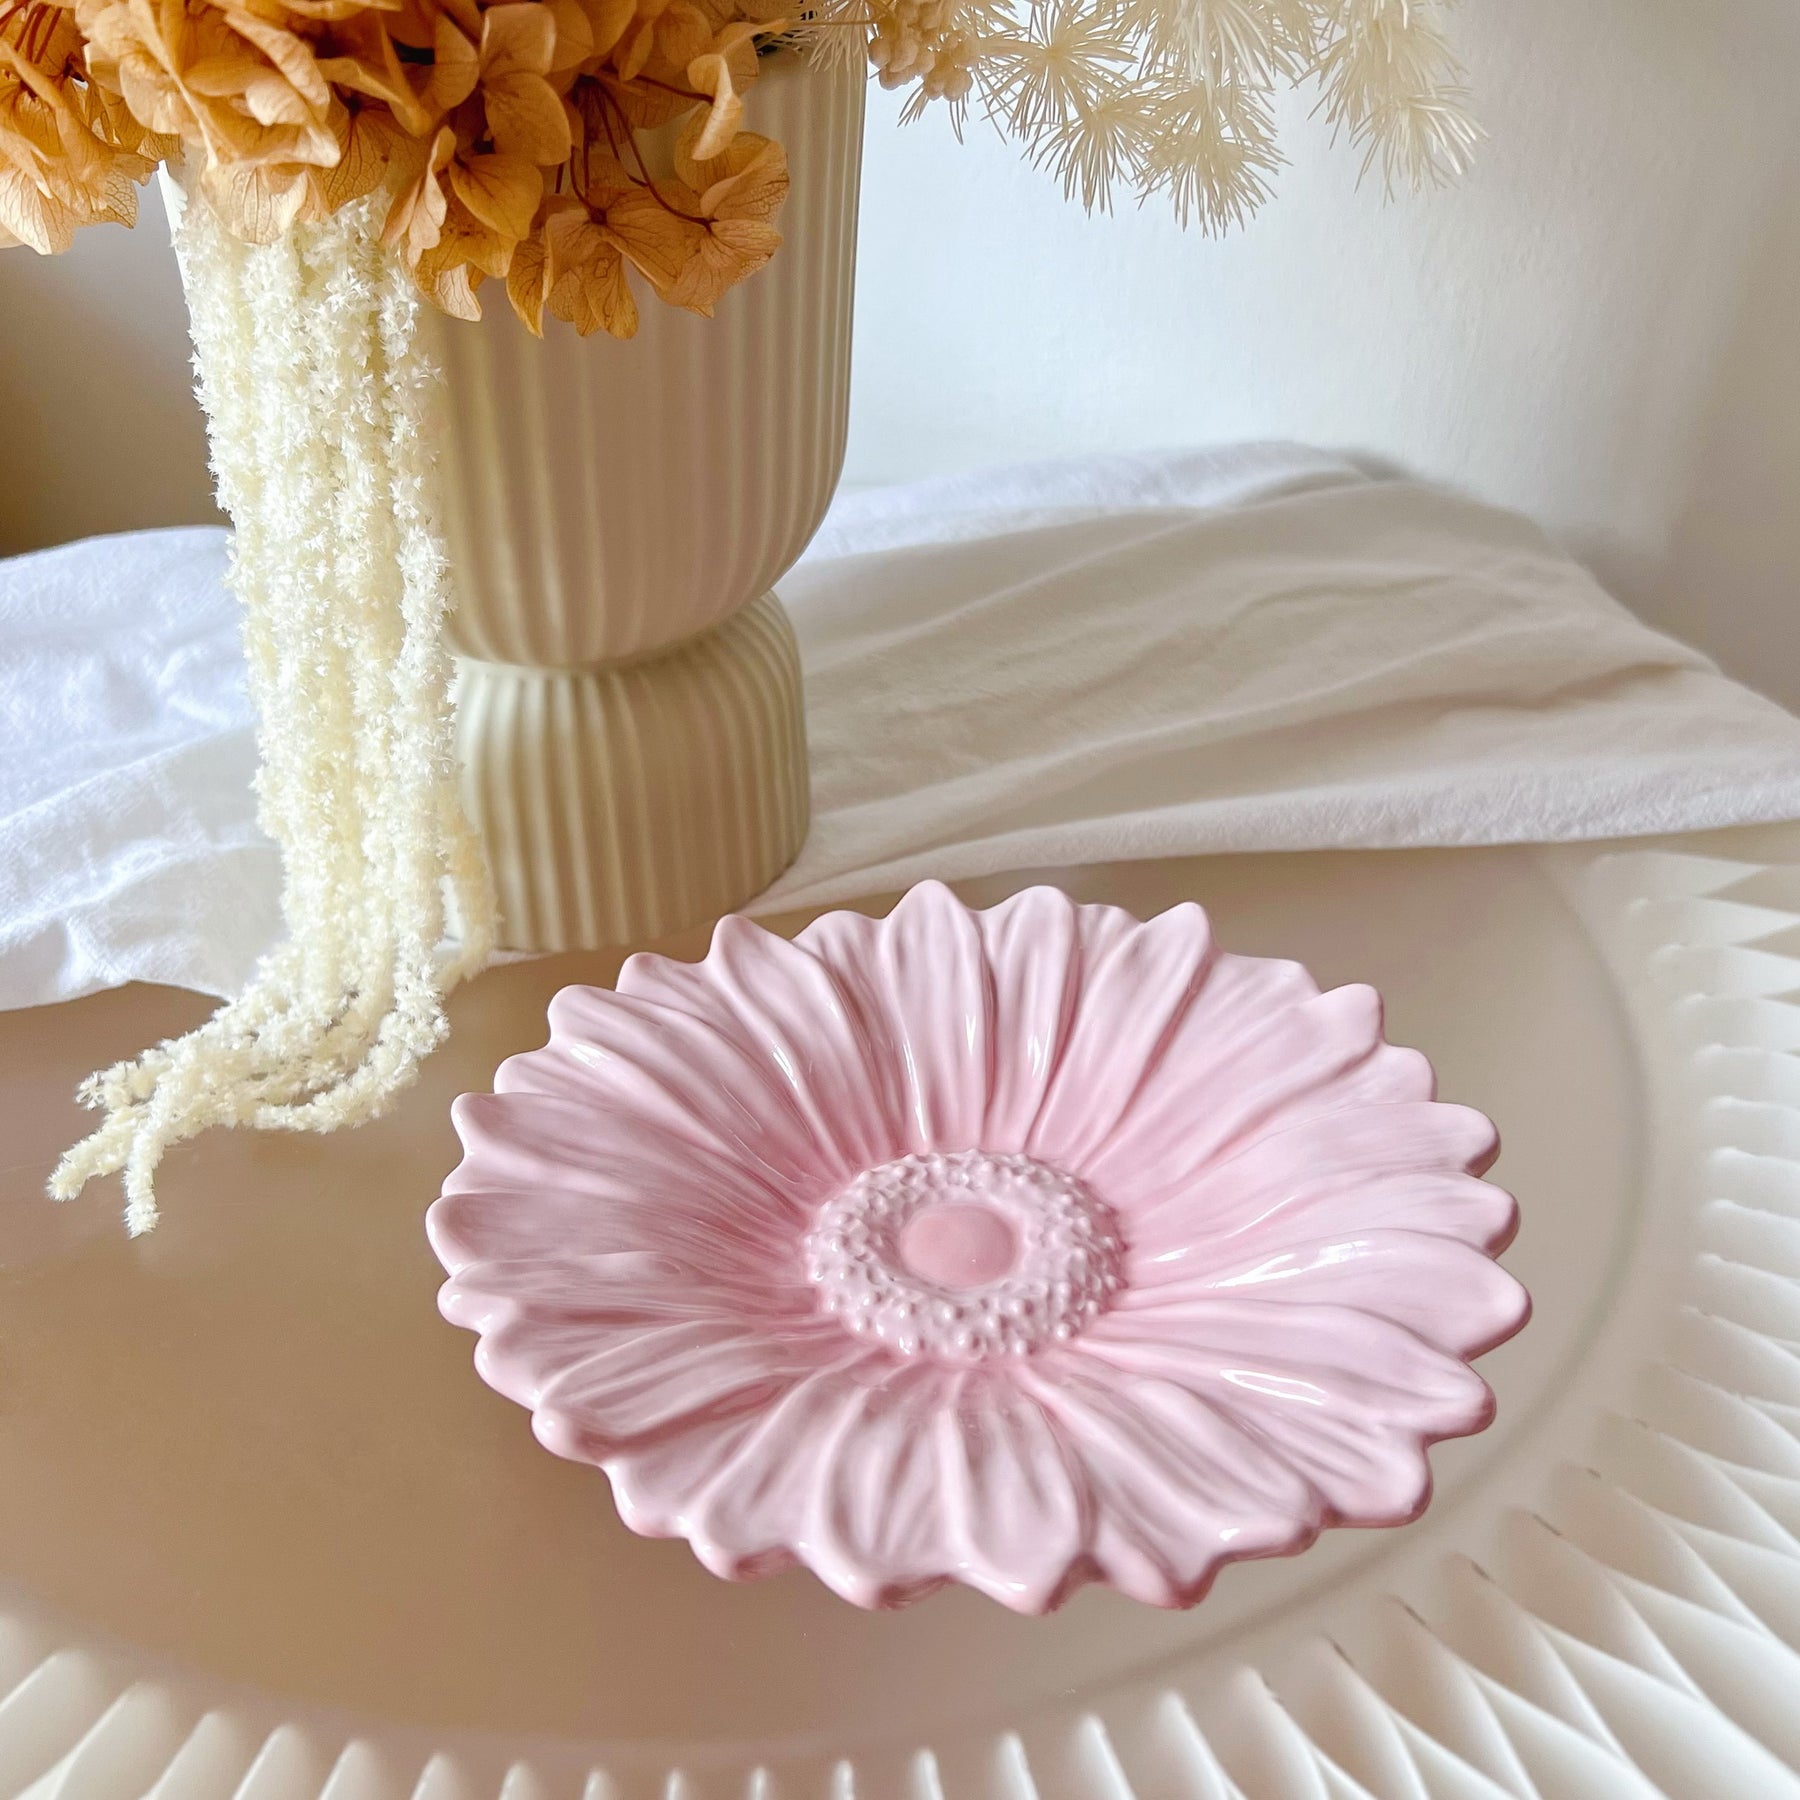 Handcrafted Flower Decorative Tray, Trinket Dish - LMJ Candles